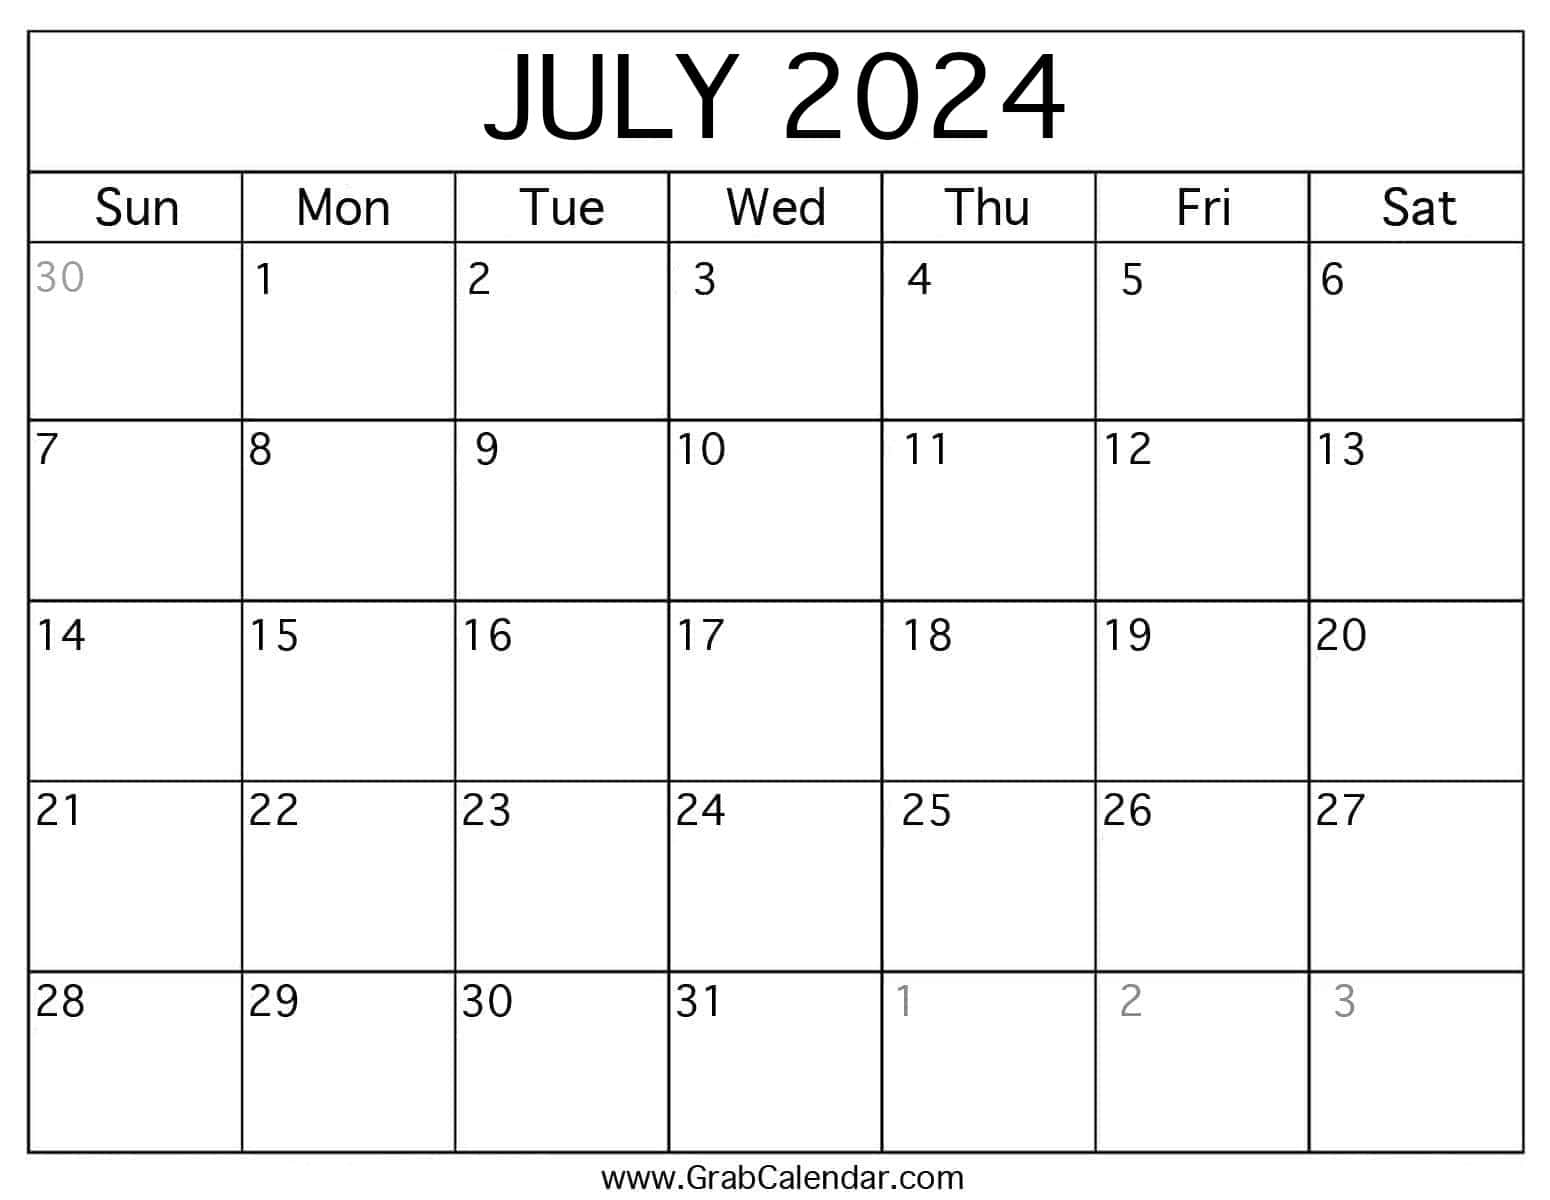 Printable July 2024 Calendar | Show Me The Calendar For The Month Of July 2024